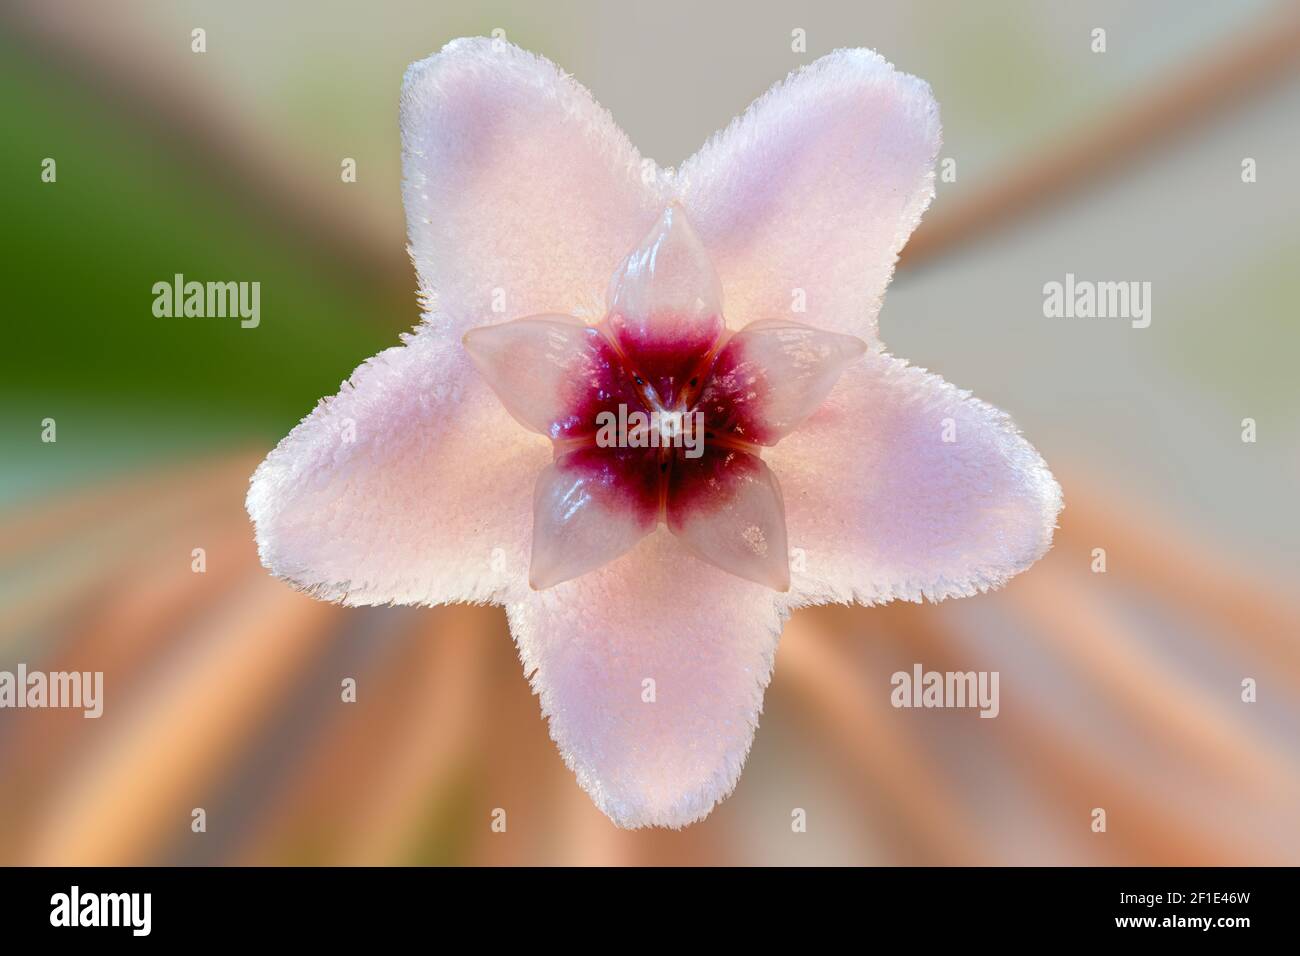 Close-up of the five star-shaped petals of a single hoya flower (waxplant, waxvine, waxflower) Stock Photo